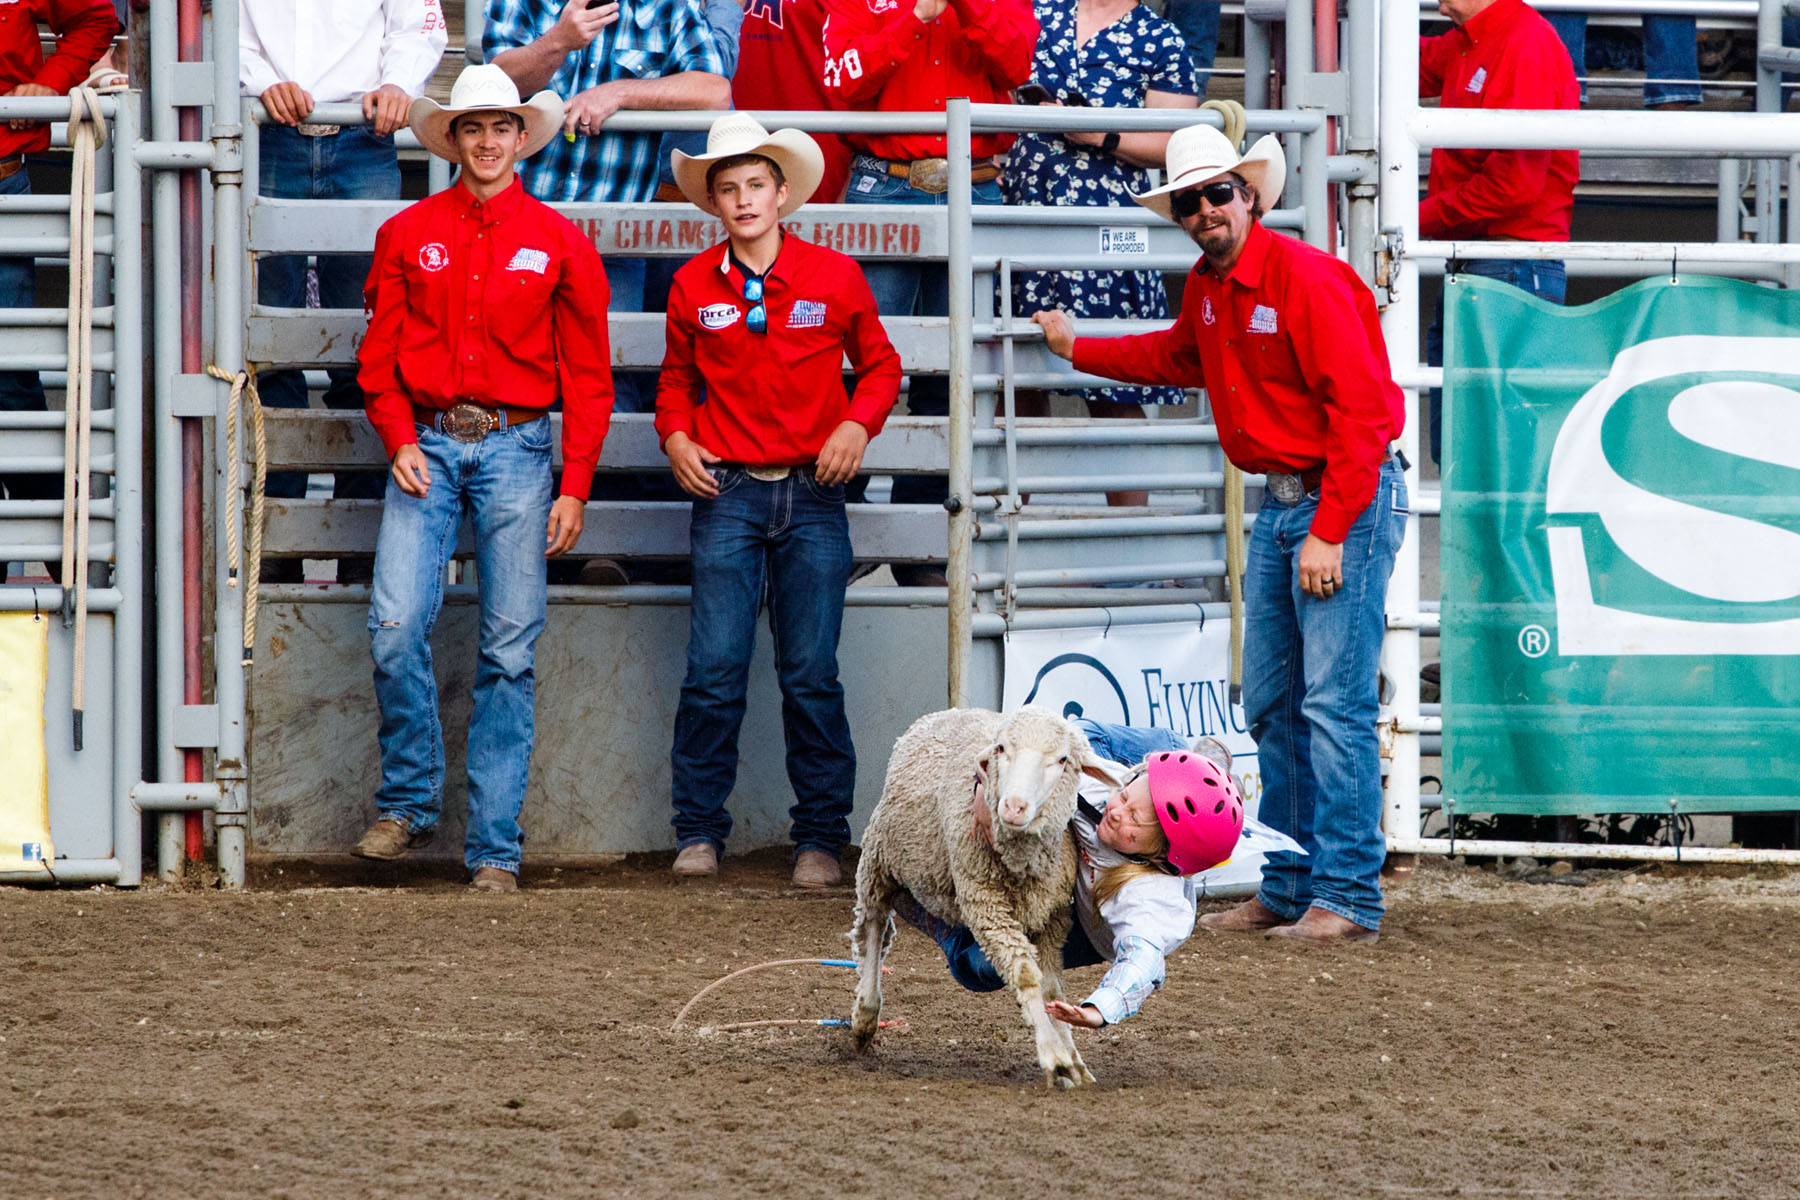 Mutton Busting, Home of Champions Rodeo, Red Lodge, MT.  Click for next photo.